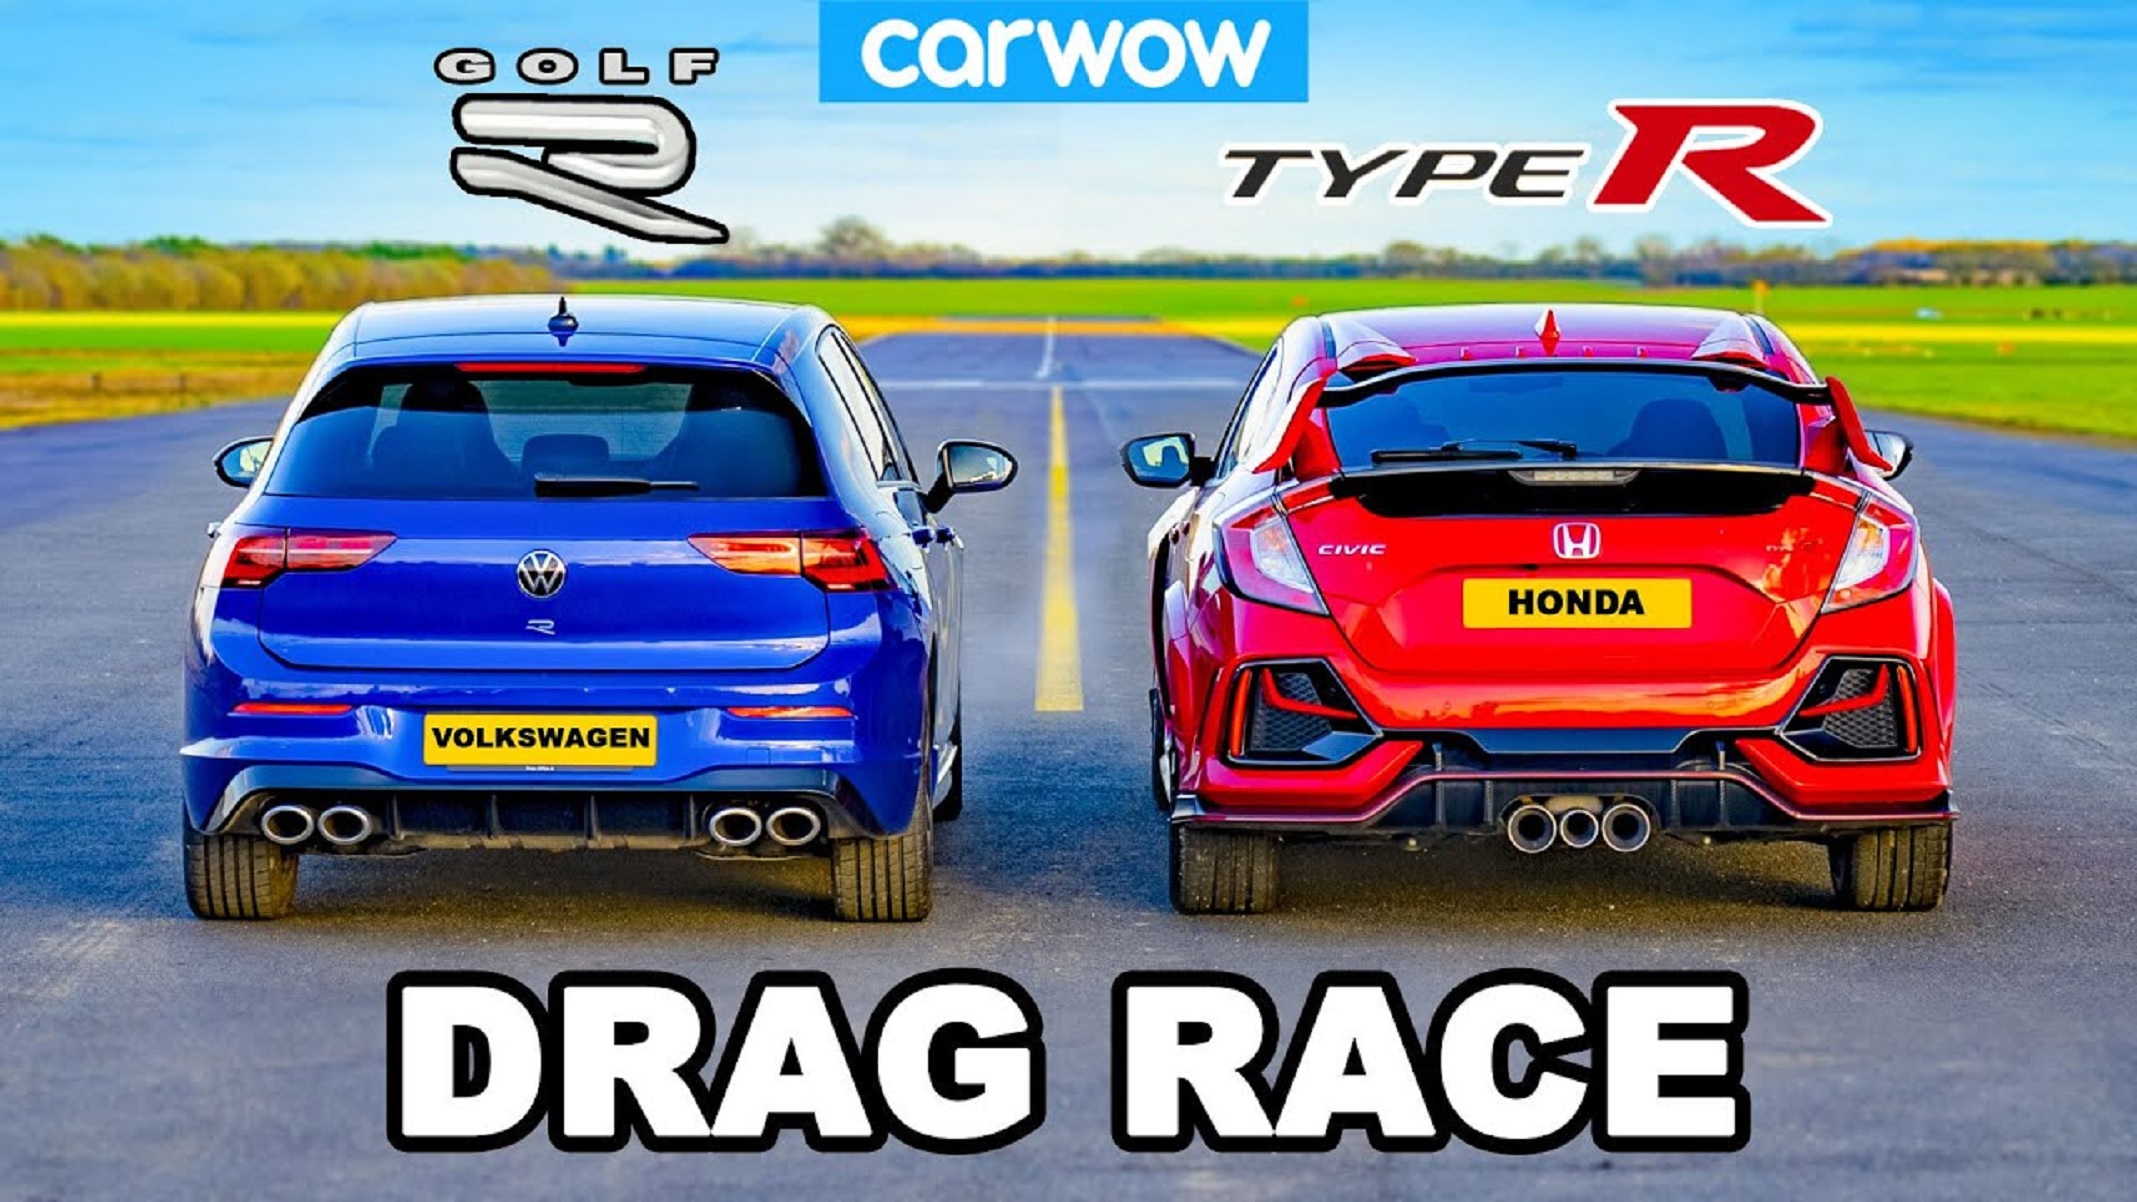 A blue 2022 Volkswagen Golf R next to a red 2021 Honda Civic Type R on an airstrip